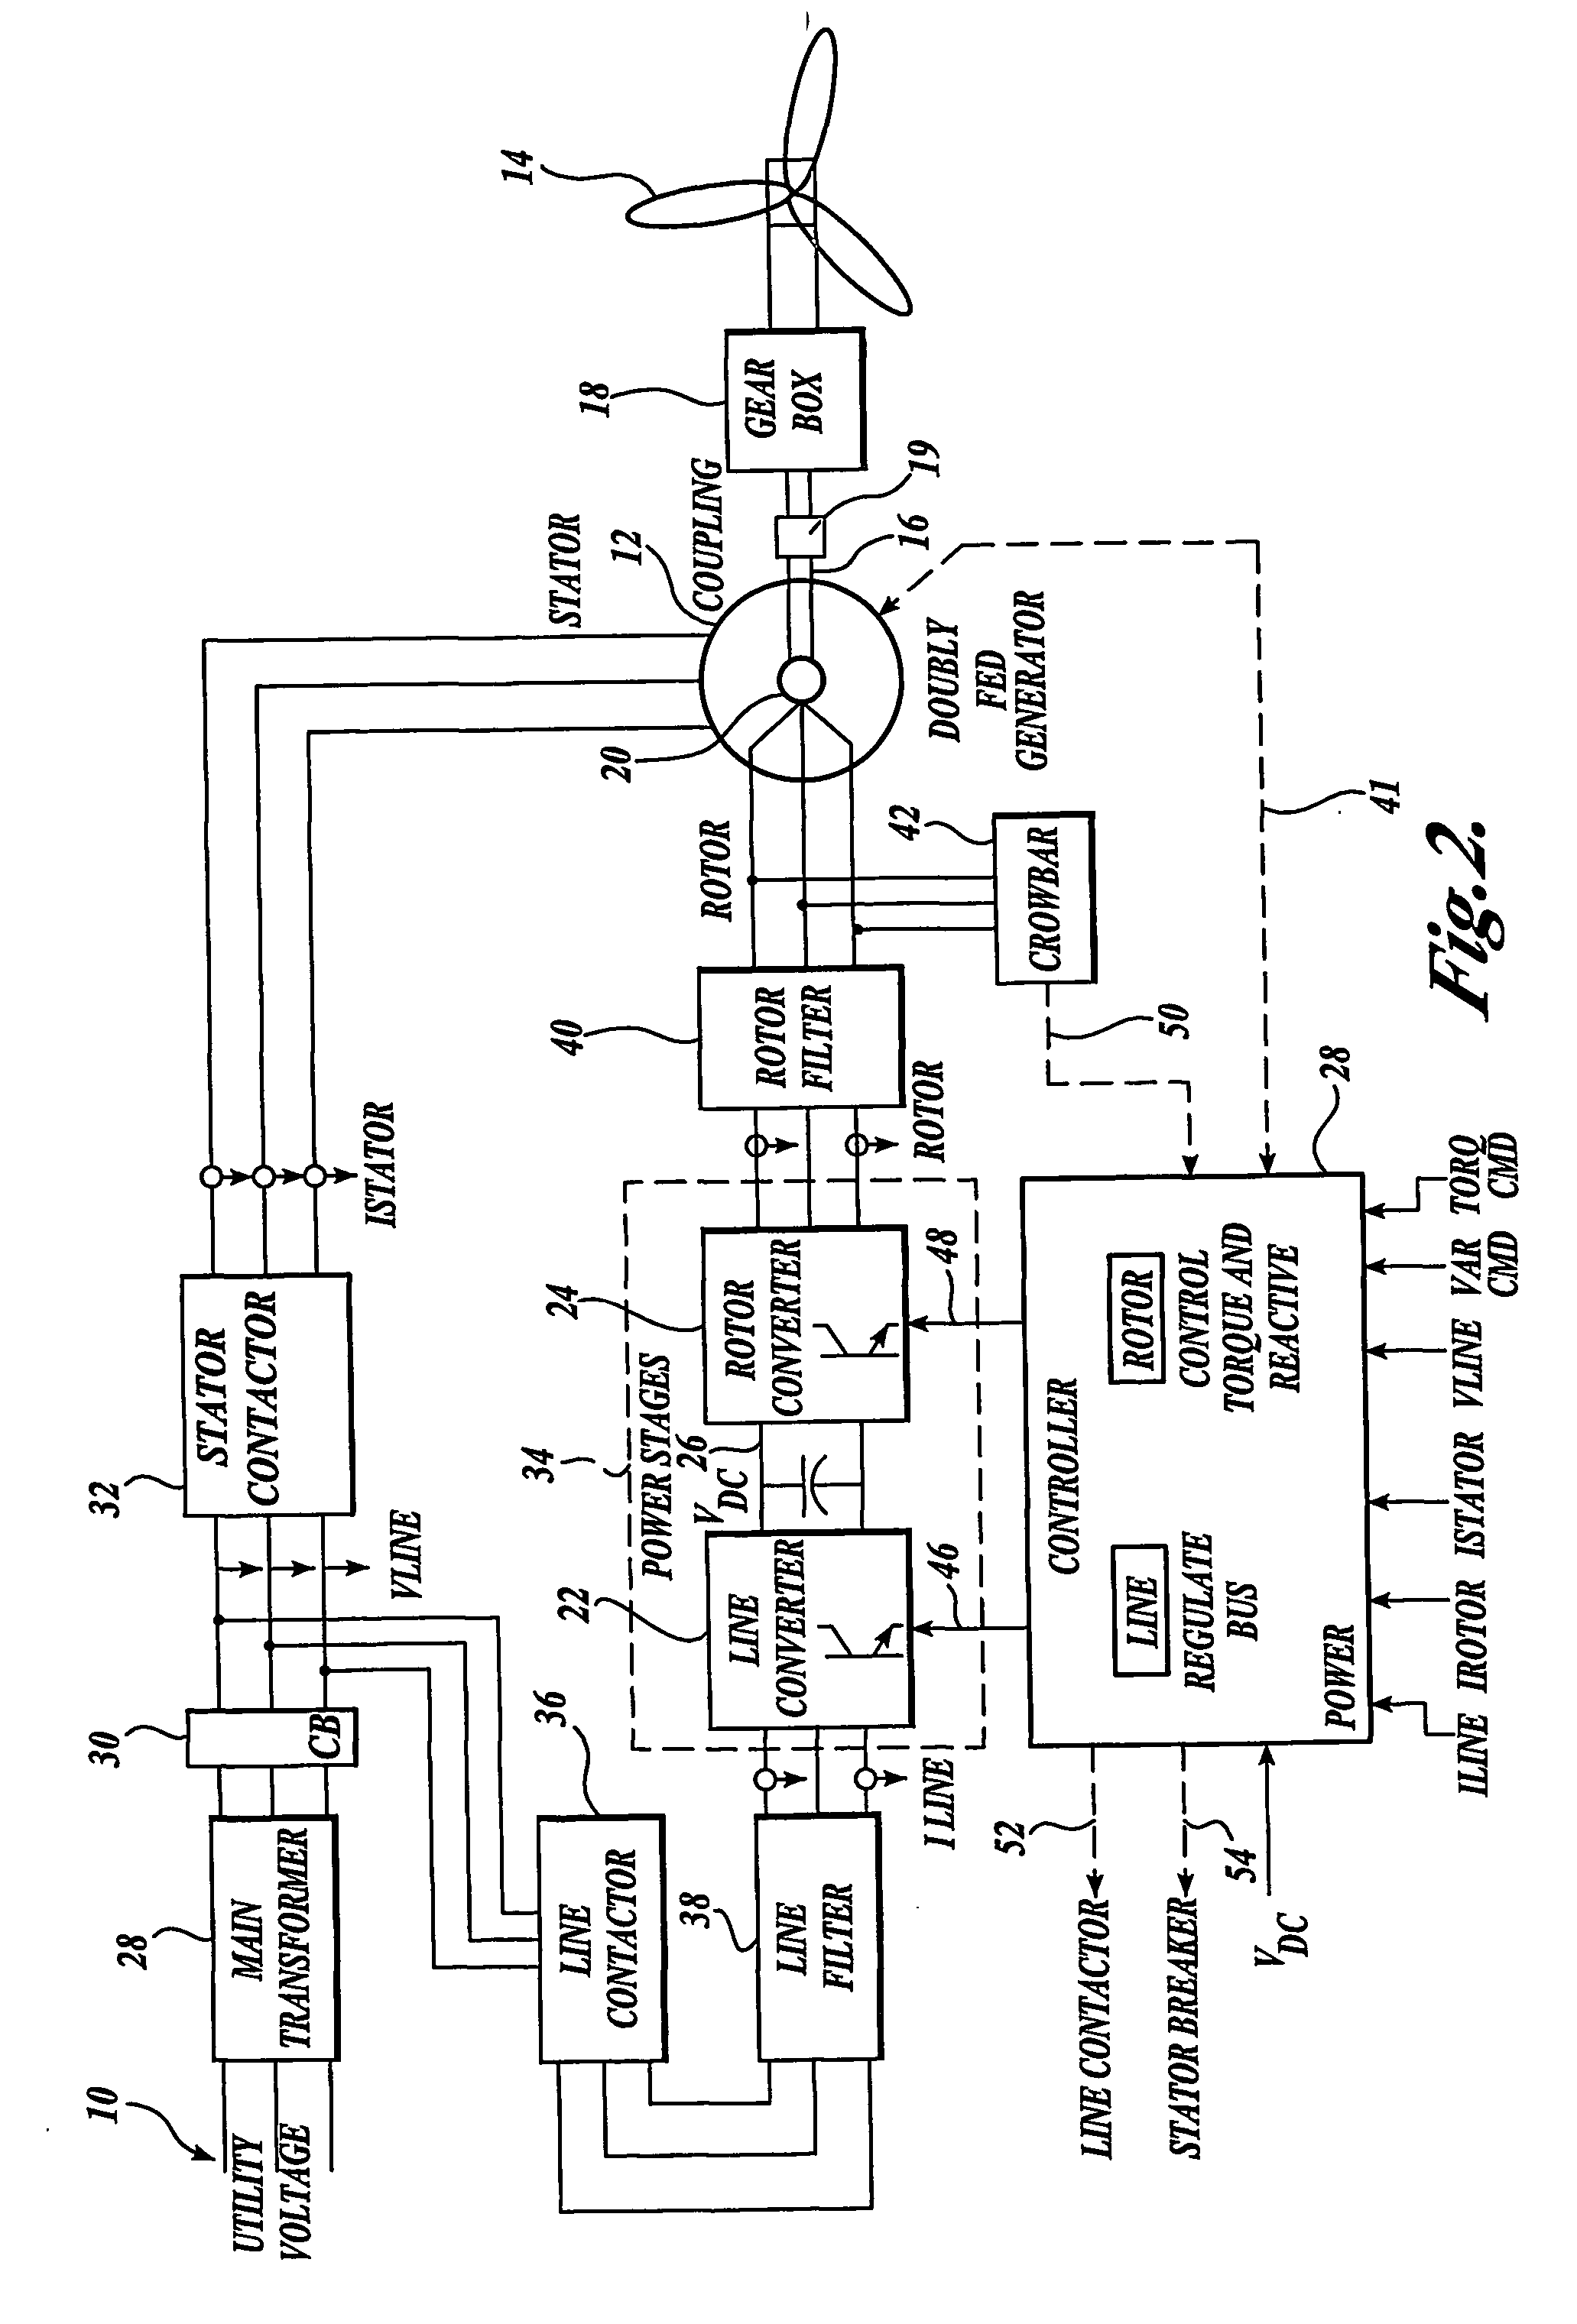 Control system for doubly fed induction generator